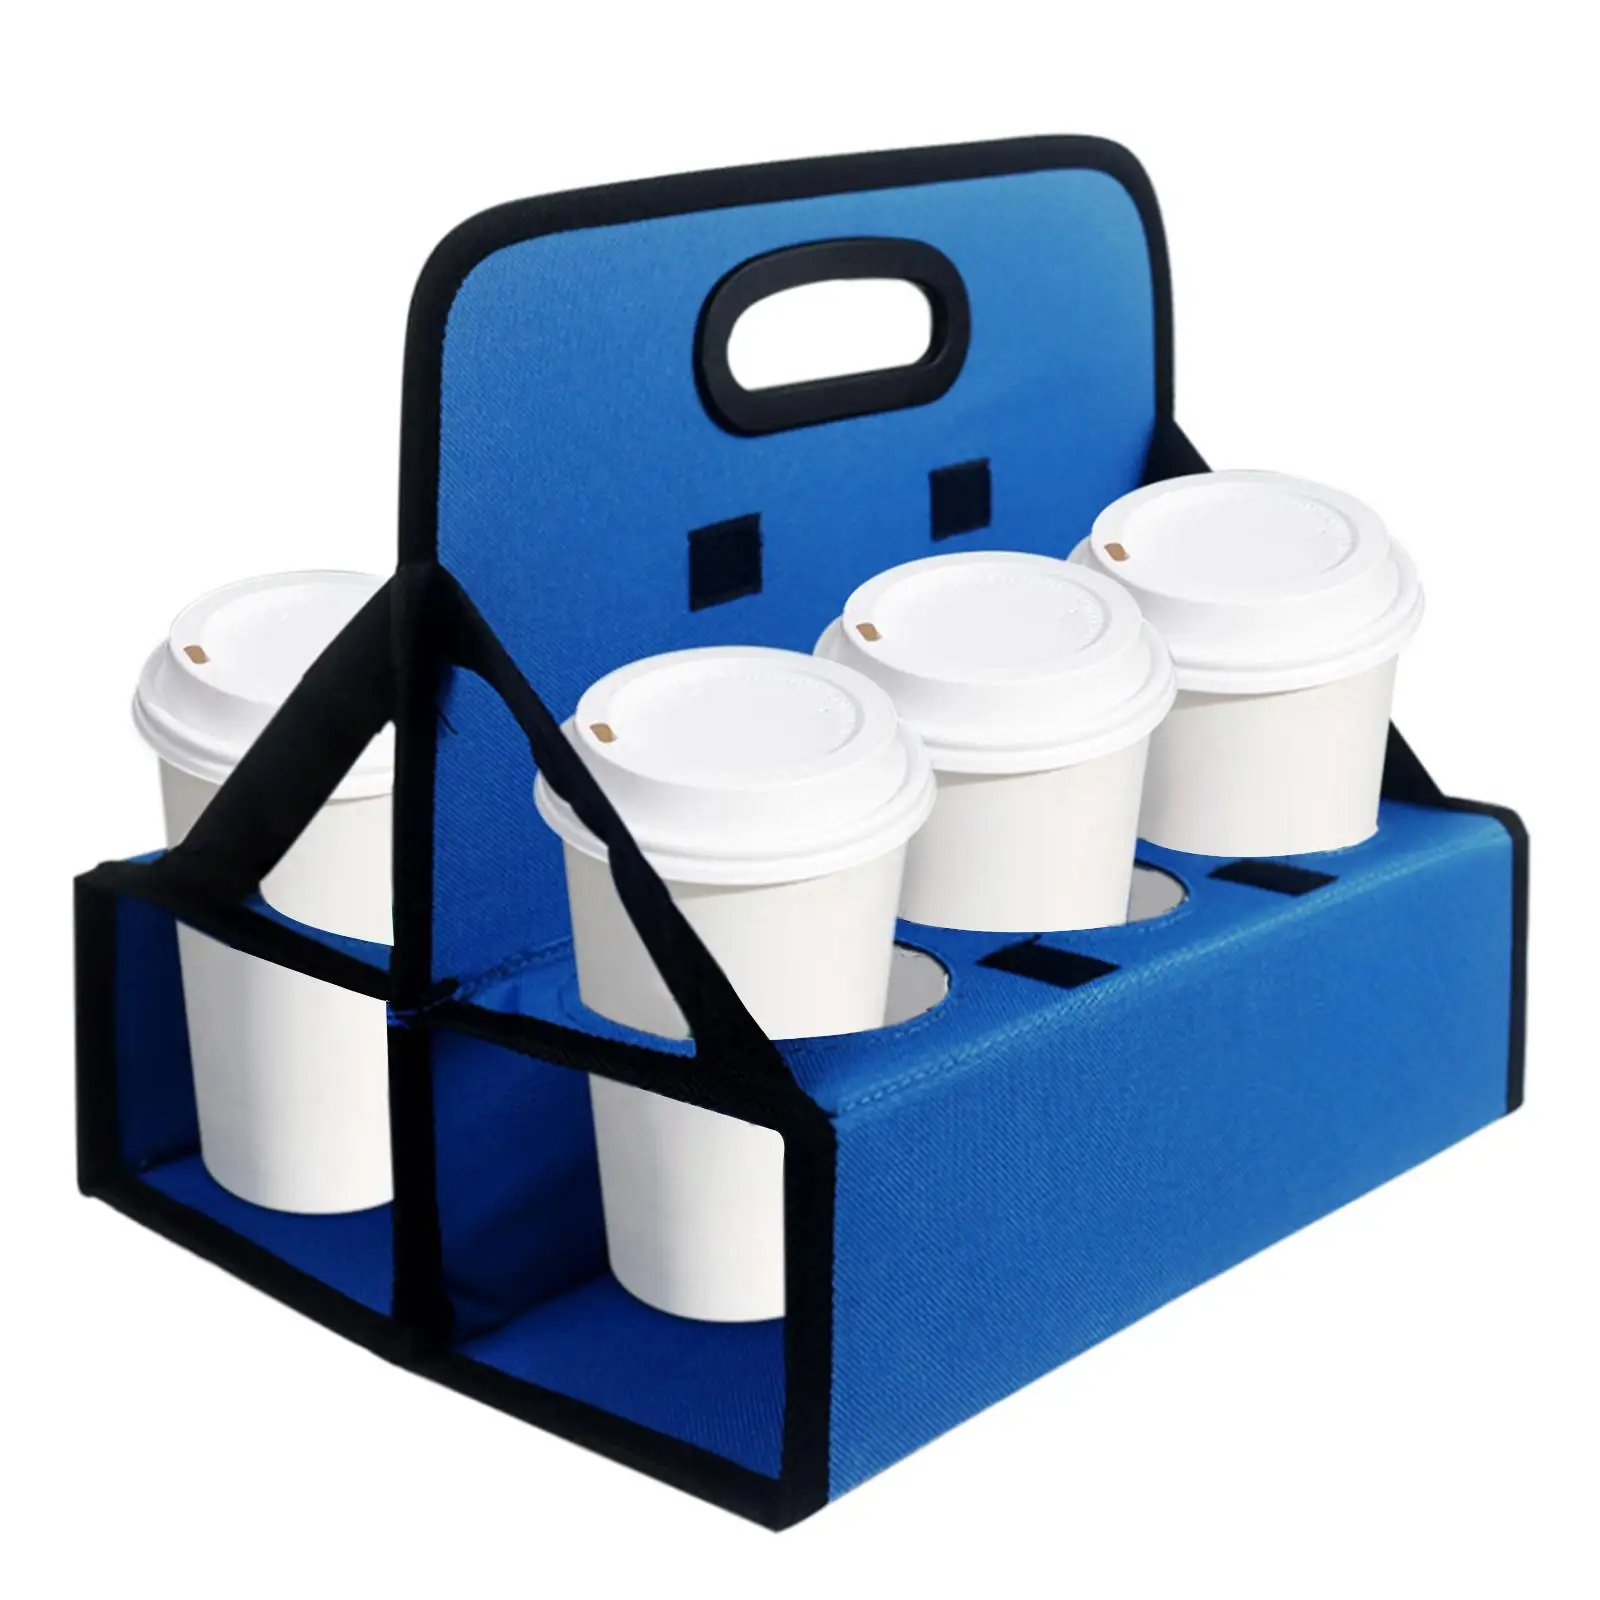 Cup Carrier Convenient Foldable Sturdy Frame Holds 6 Cups cup for Outdoor Activities Picnic Restaurant Food Delivery Beach